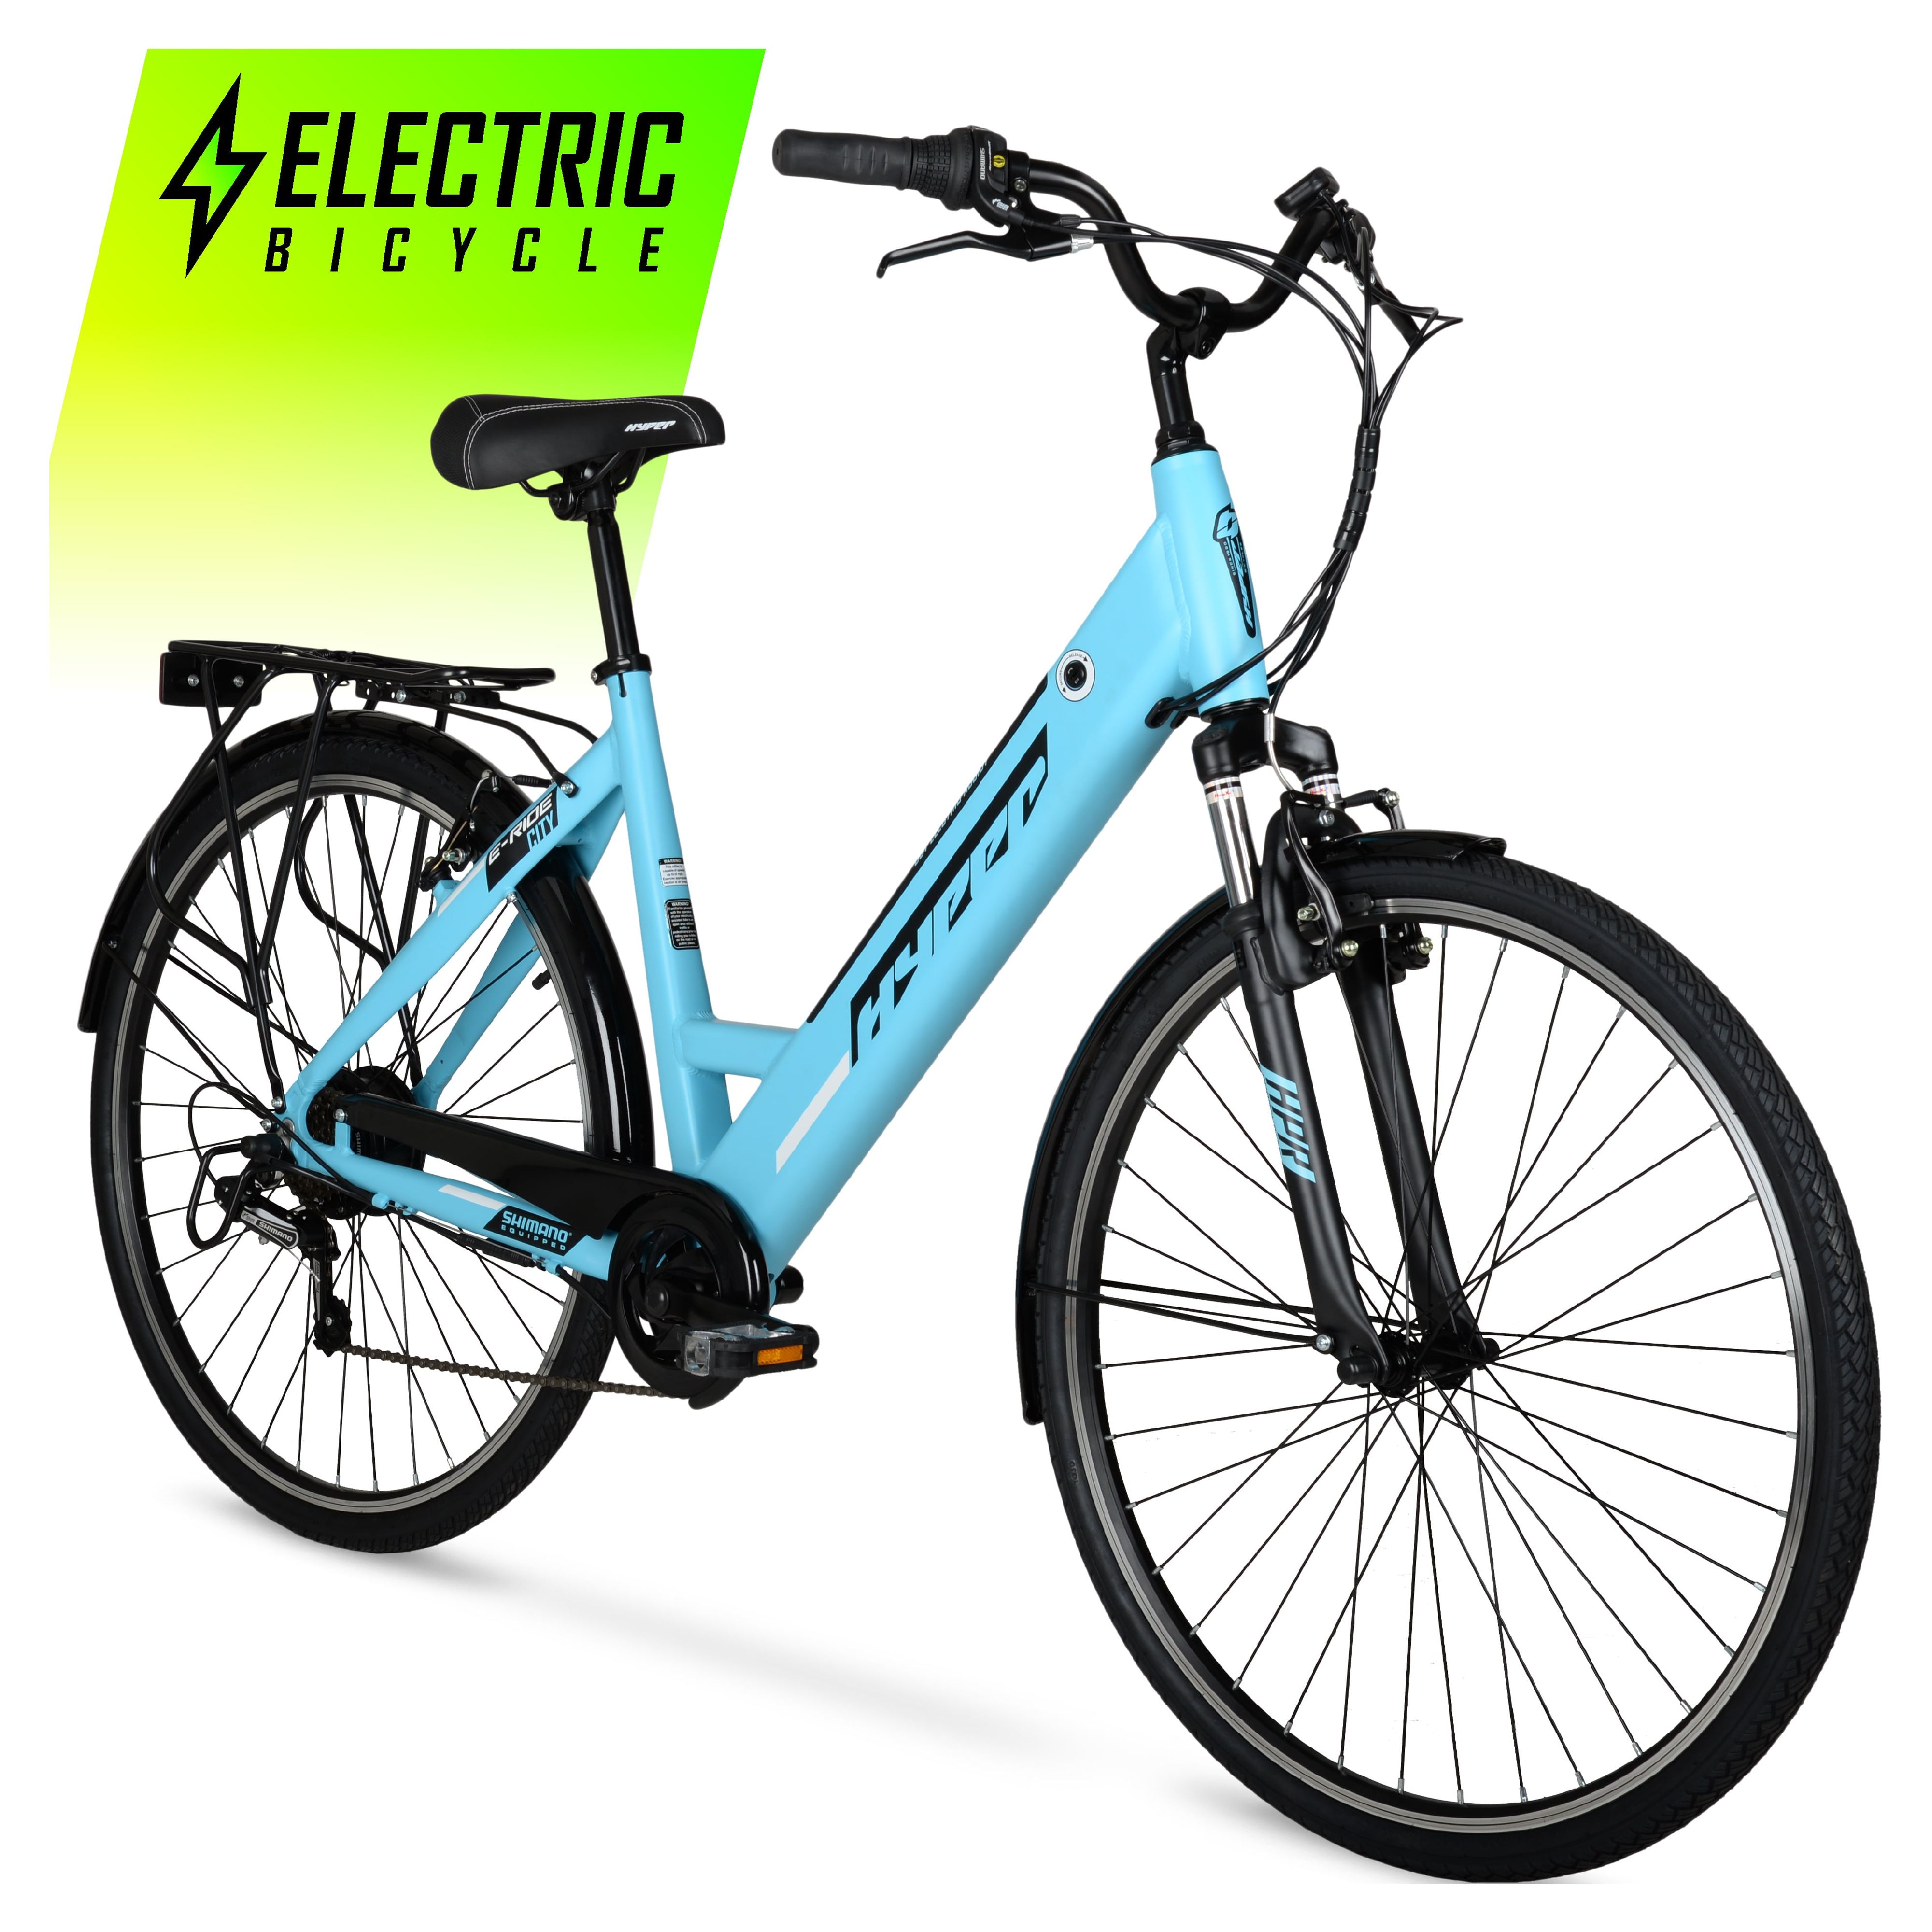 Hyper Bicycles E-Ride 700C 36V Electric Commuter E-Bike for Adults, Pedal-Assist, 250W Motor, Blue - image 3 of 18